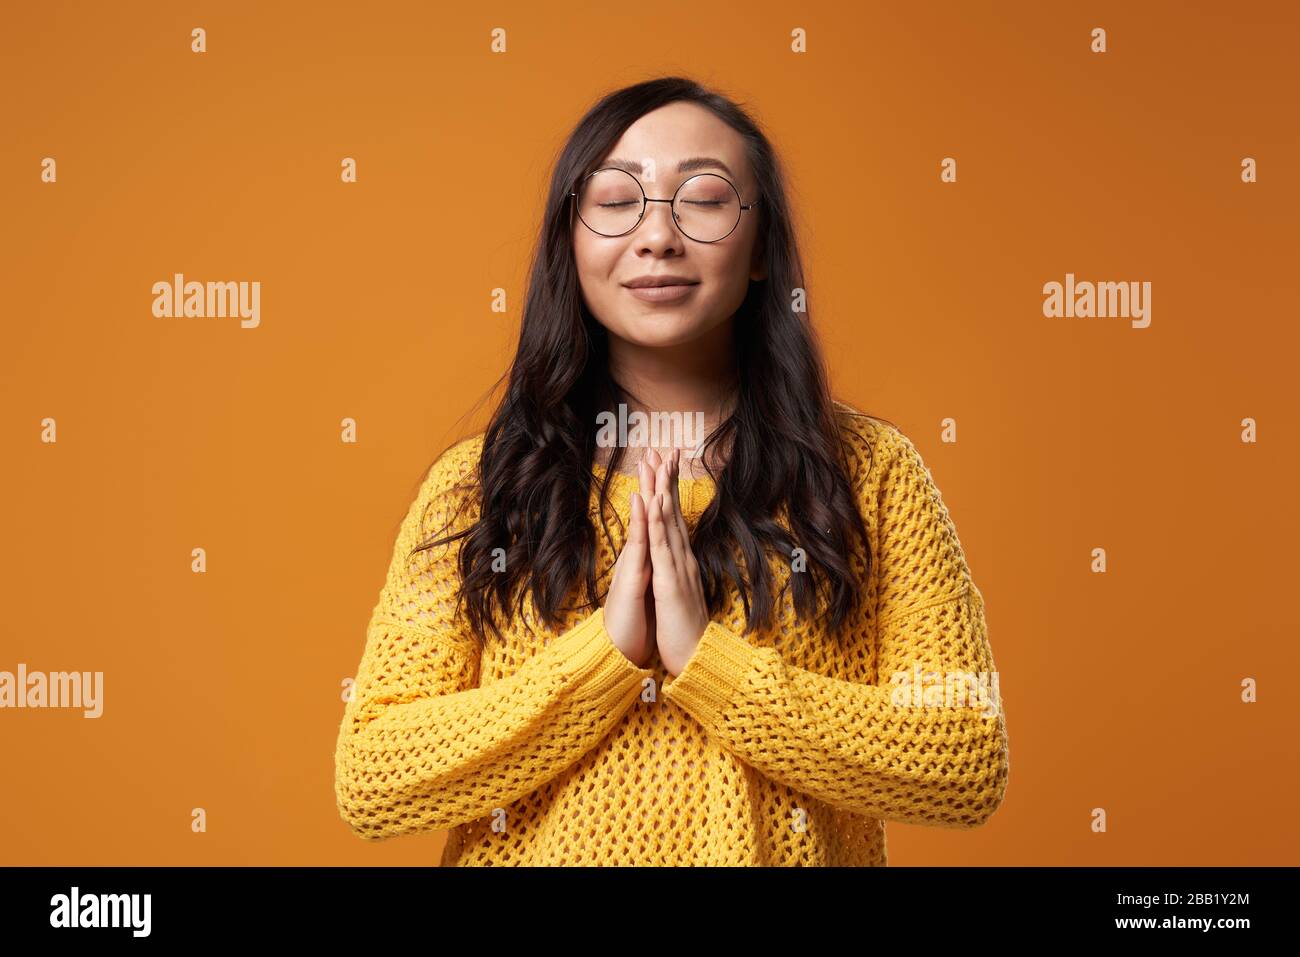 Praying young asian woman with closed eyes wearing glasses and in yellow knitted sweater on empty orange background in studio Stock Photo